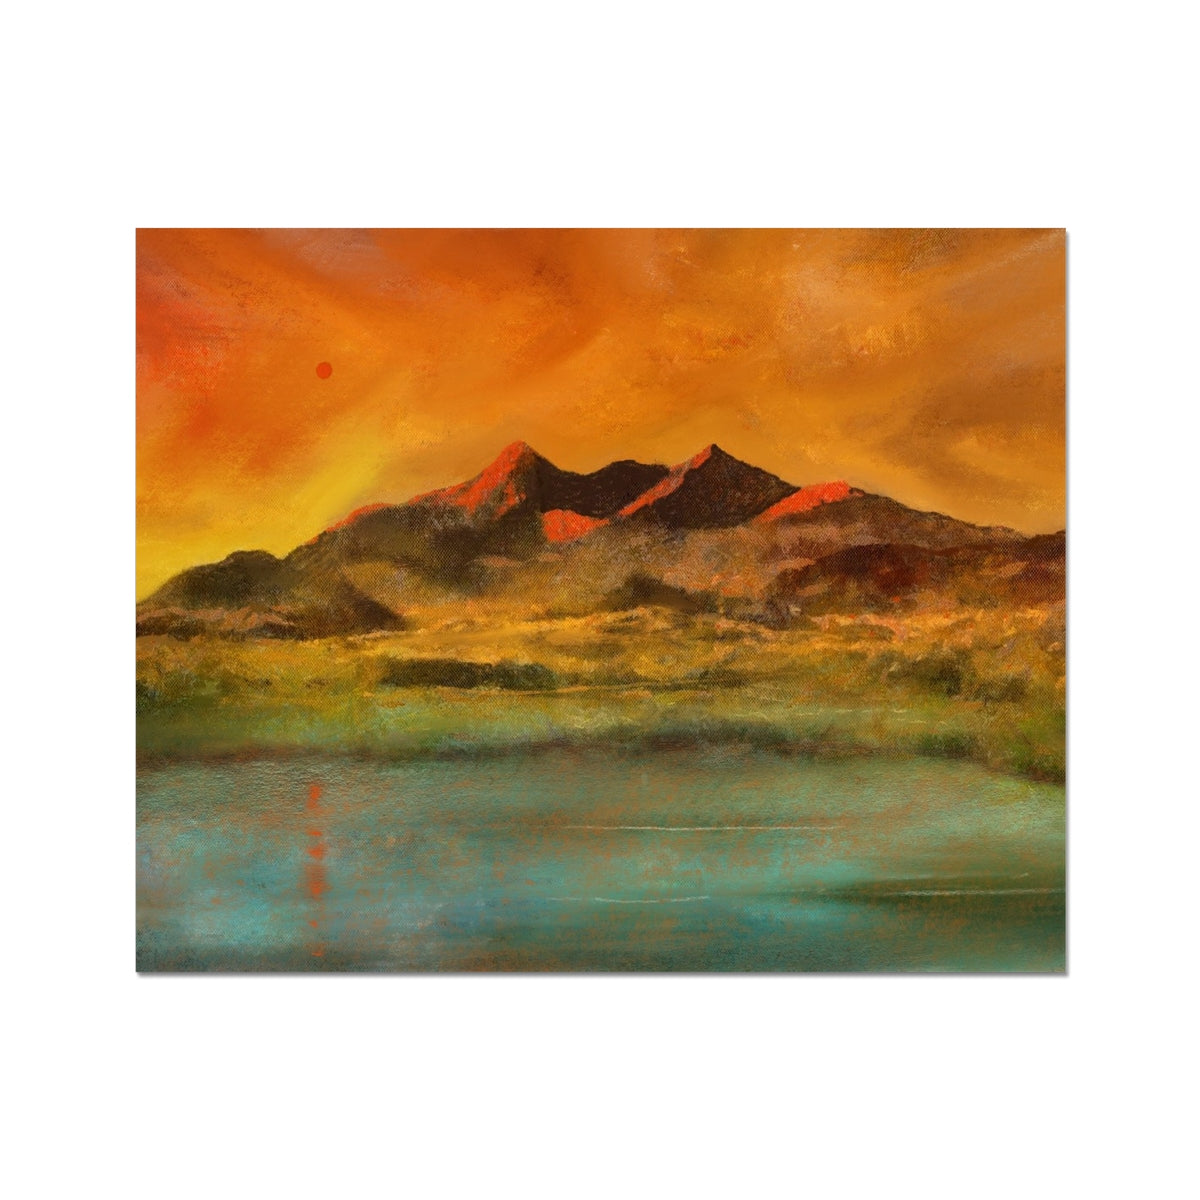 Skye Red Moon Cuillin Painting | Artist Proof Collector Prints From Scotland-Artist Proof Collector Prints-Skye Art Gallery-20"x16"-Paintings, Prints, Homeware, Art Gifts From Scotland By Scottish Artist Kevin Hunter